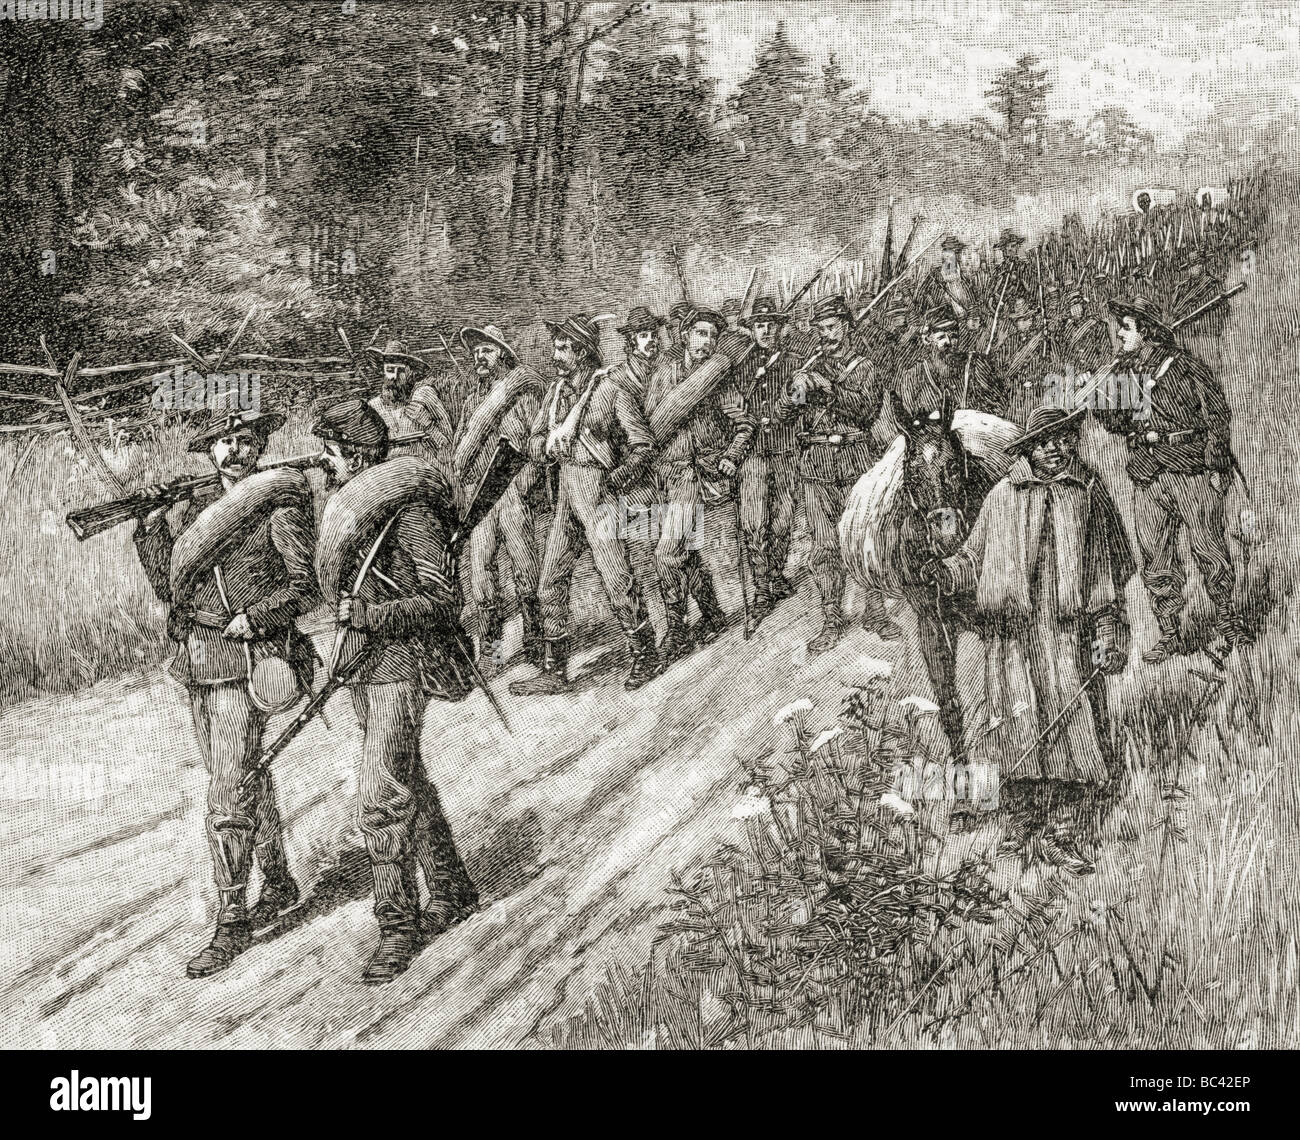 Sherman's Army on the March to the Sea, 1865. Stock Photo